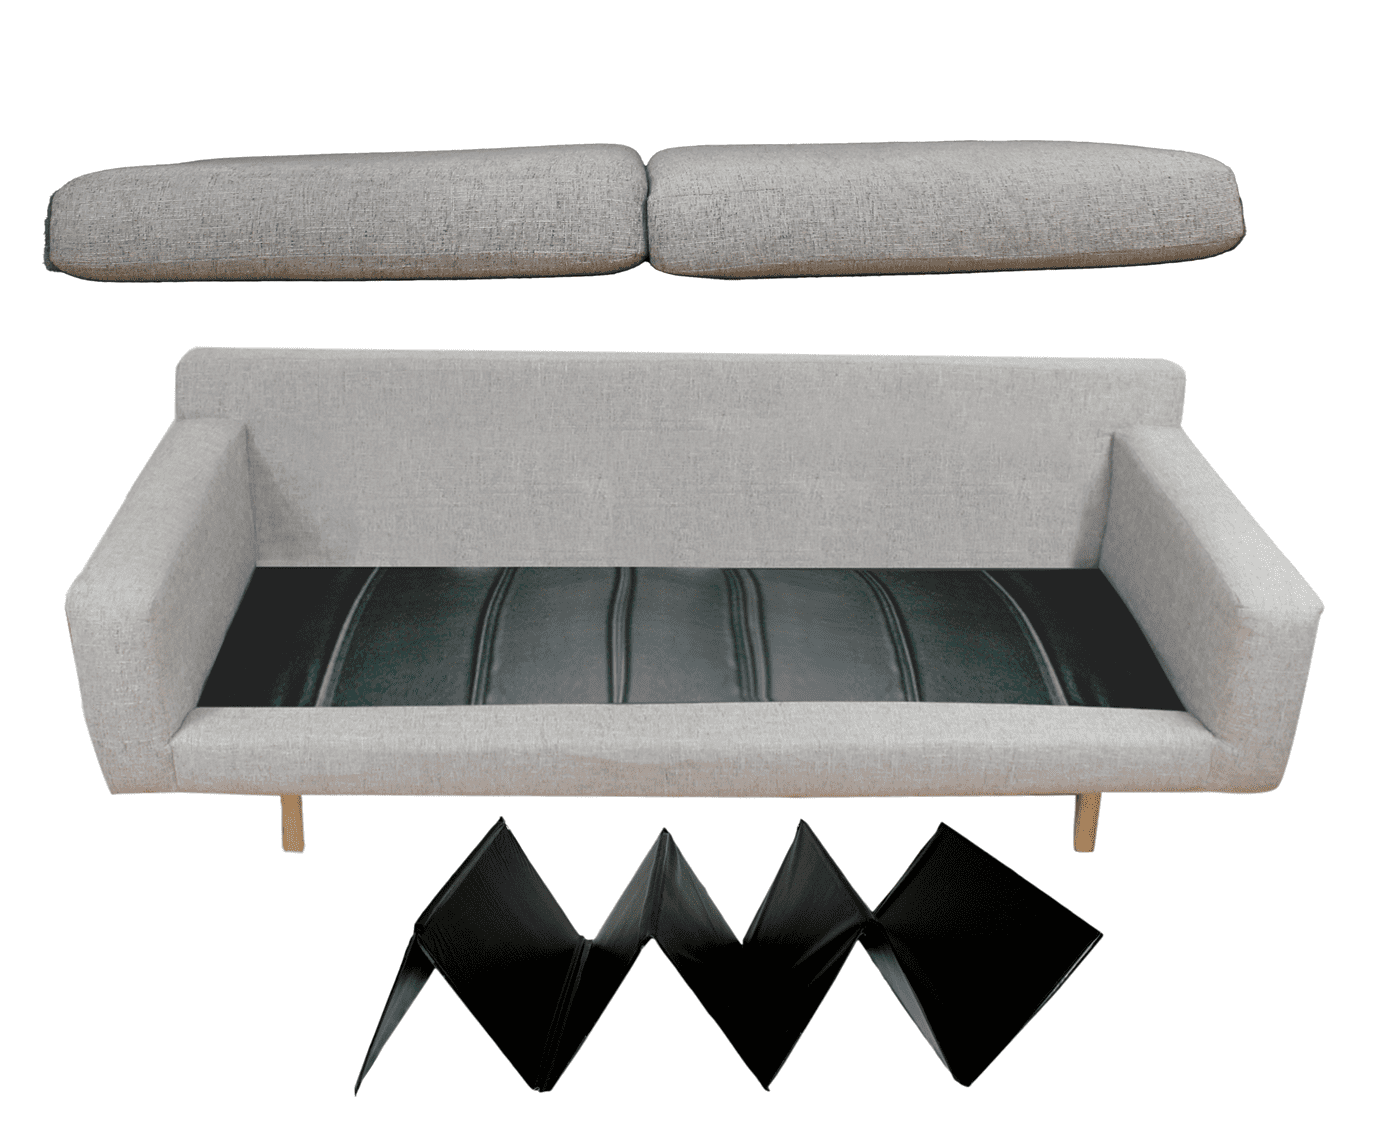  LEMATEEK Couch Cushion Support Board for Sagging Seat